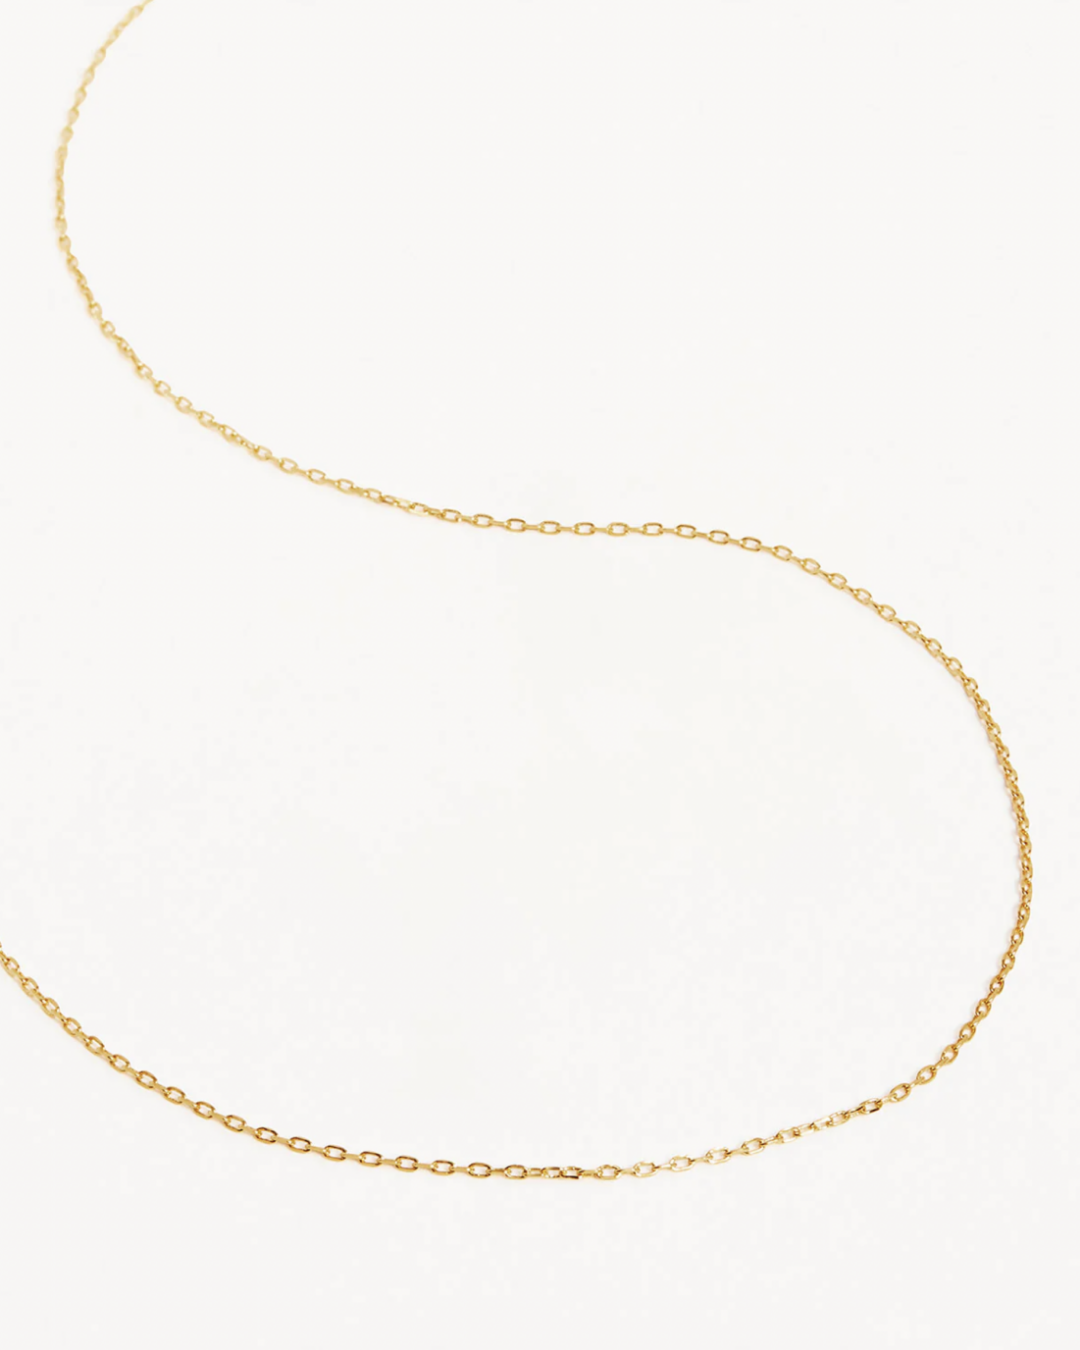 21" Signature Chain Necklace Jewellery by By Charlotte - Prae Wellness